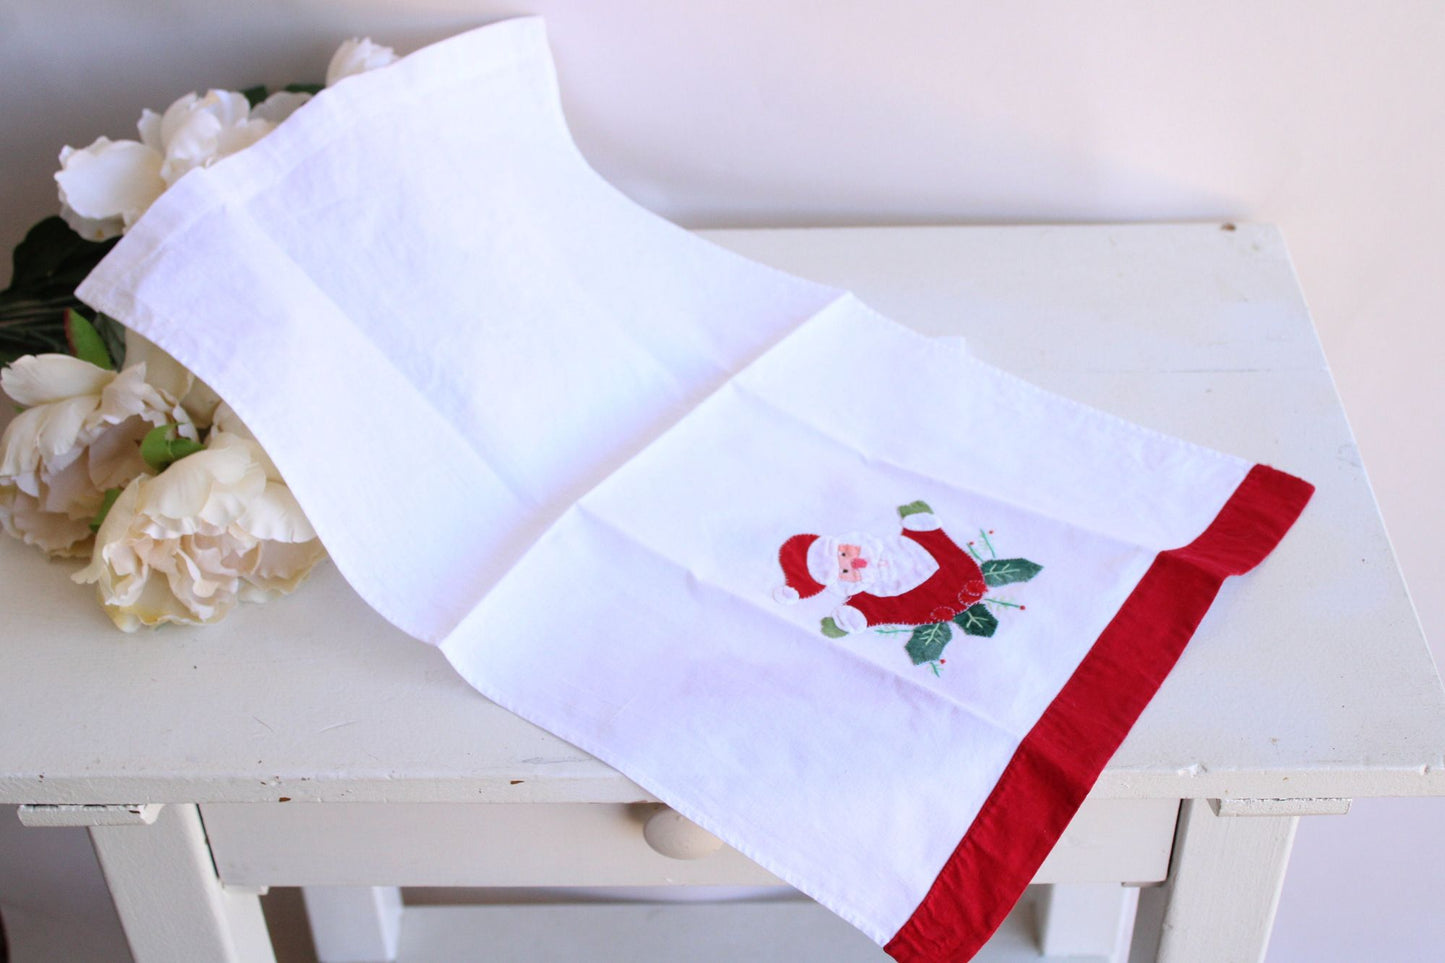 Vintage 1980s Christmas Holiday Towels with Santa Claus and Candle Appliques